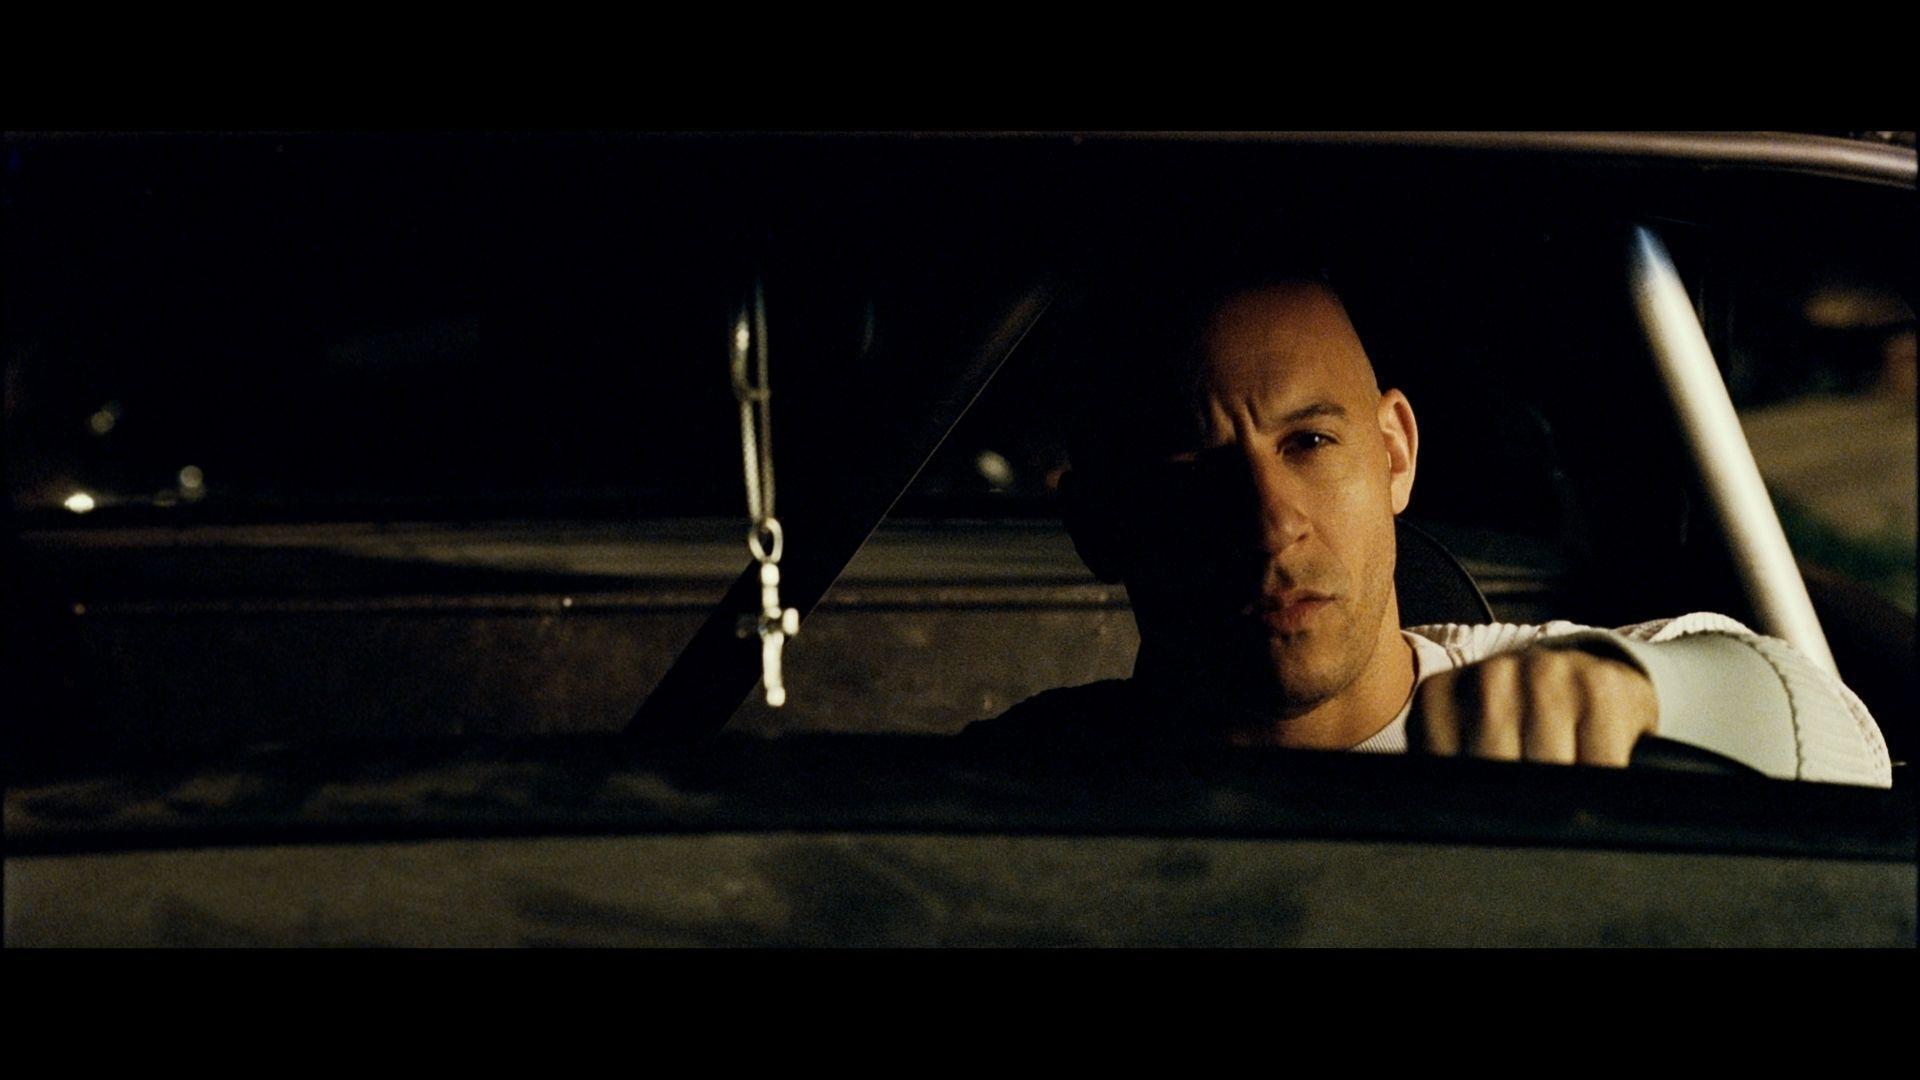 Fast and Furious Vin Diesel in Wallpaper 1920x1080. Hot HD Wallpaper